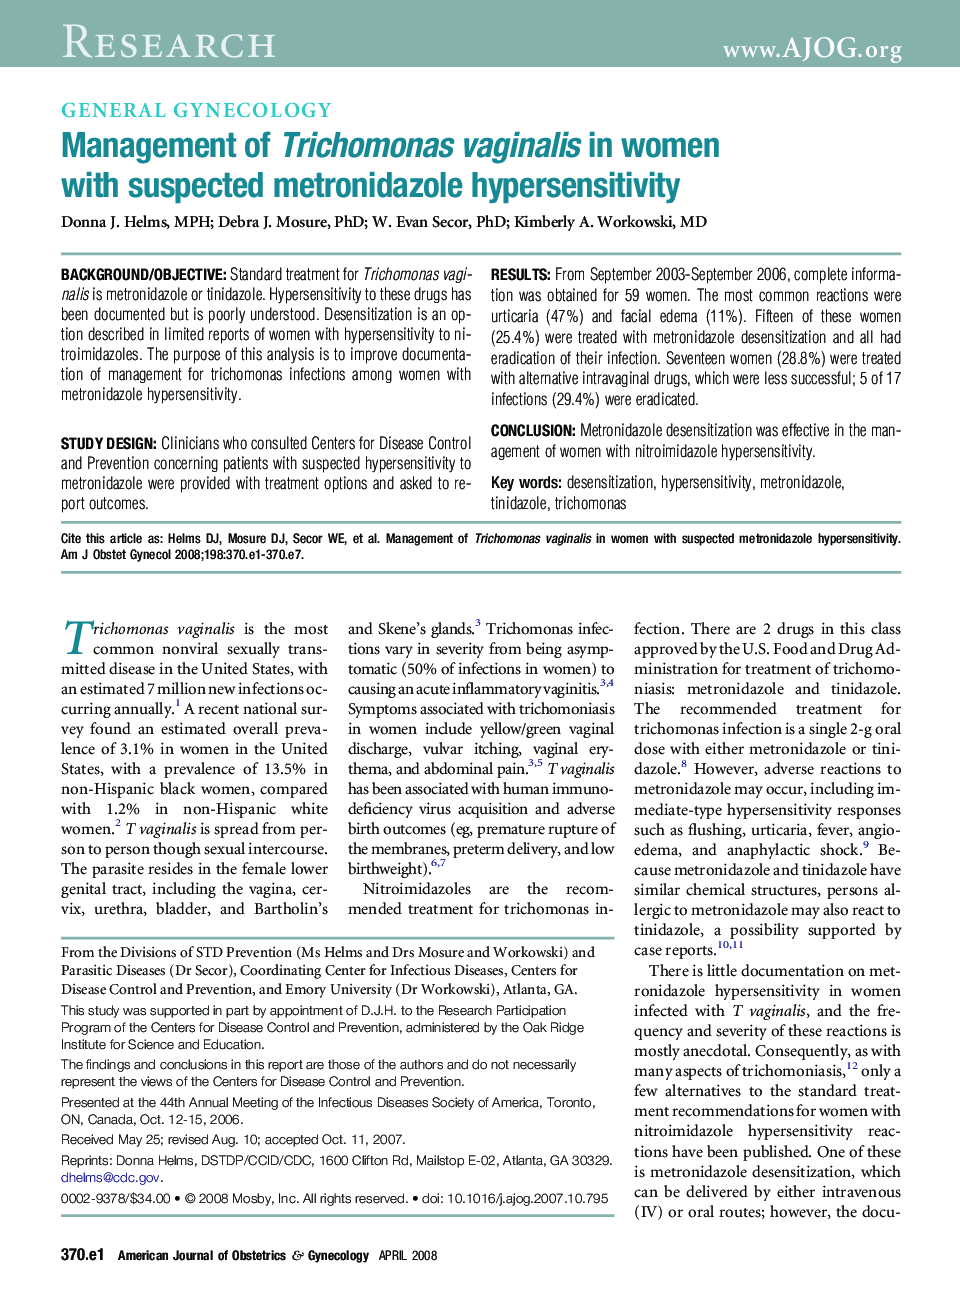 Management of Trichomonas vaginalis in women with suspected metronidazole hypersensitivity